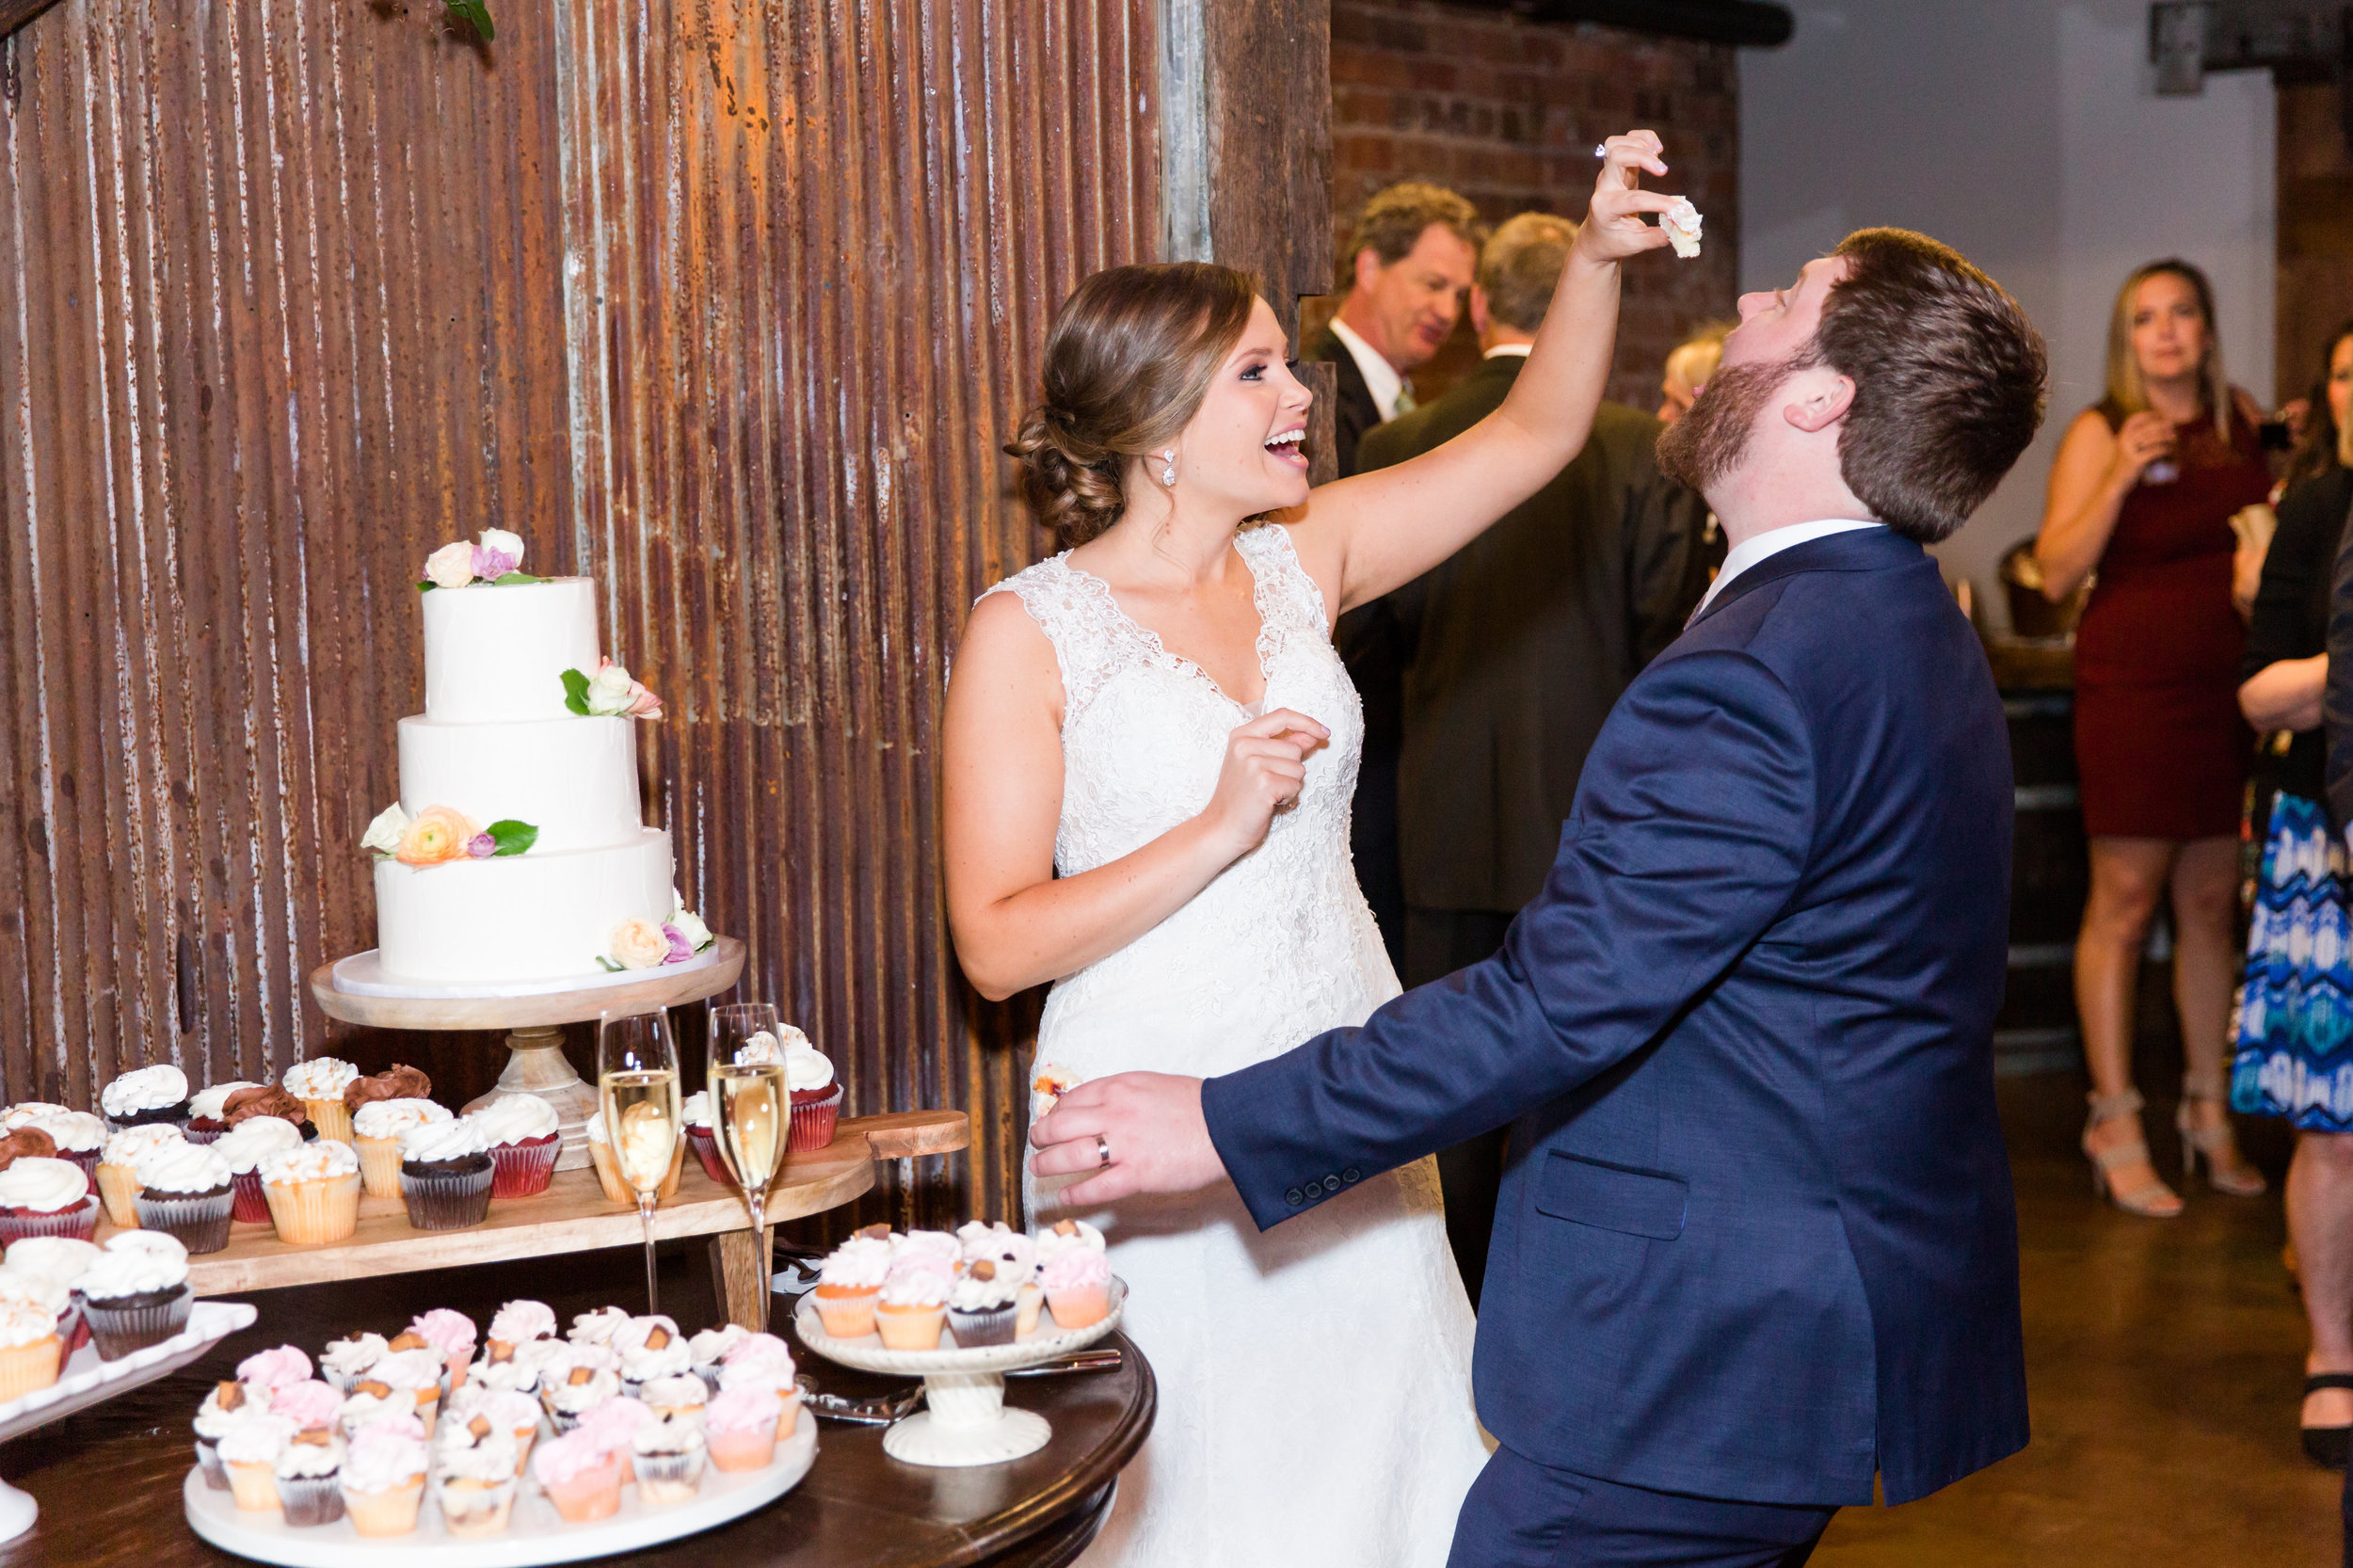  Megan and Ben enjoying some delicious cake from Couture Cakes. Susan is extremely talented at wedding cake design. She can really do anything with a cake! 